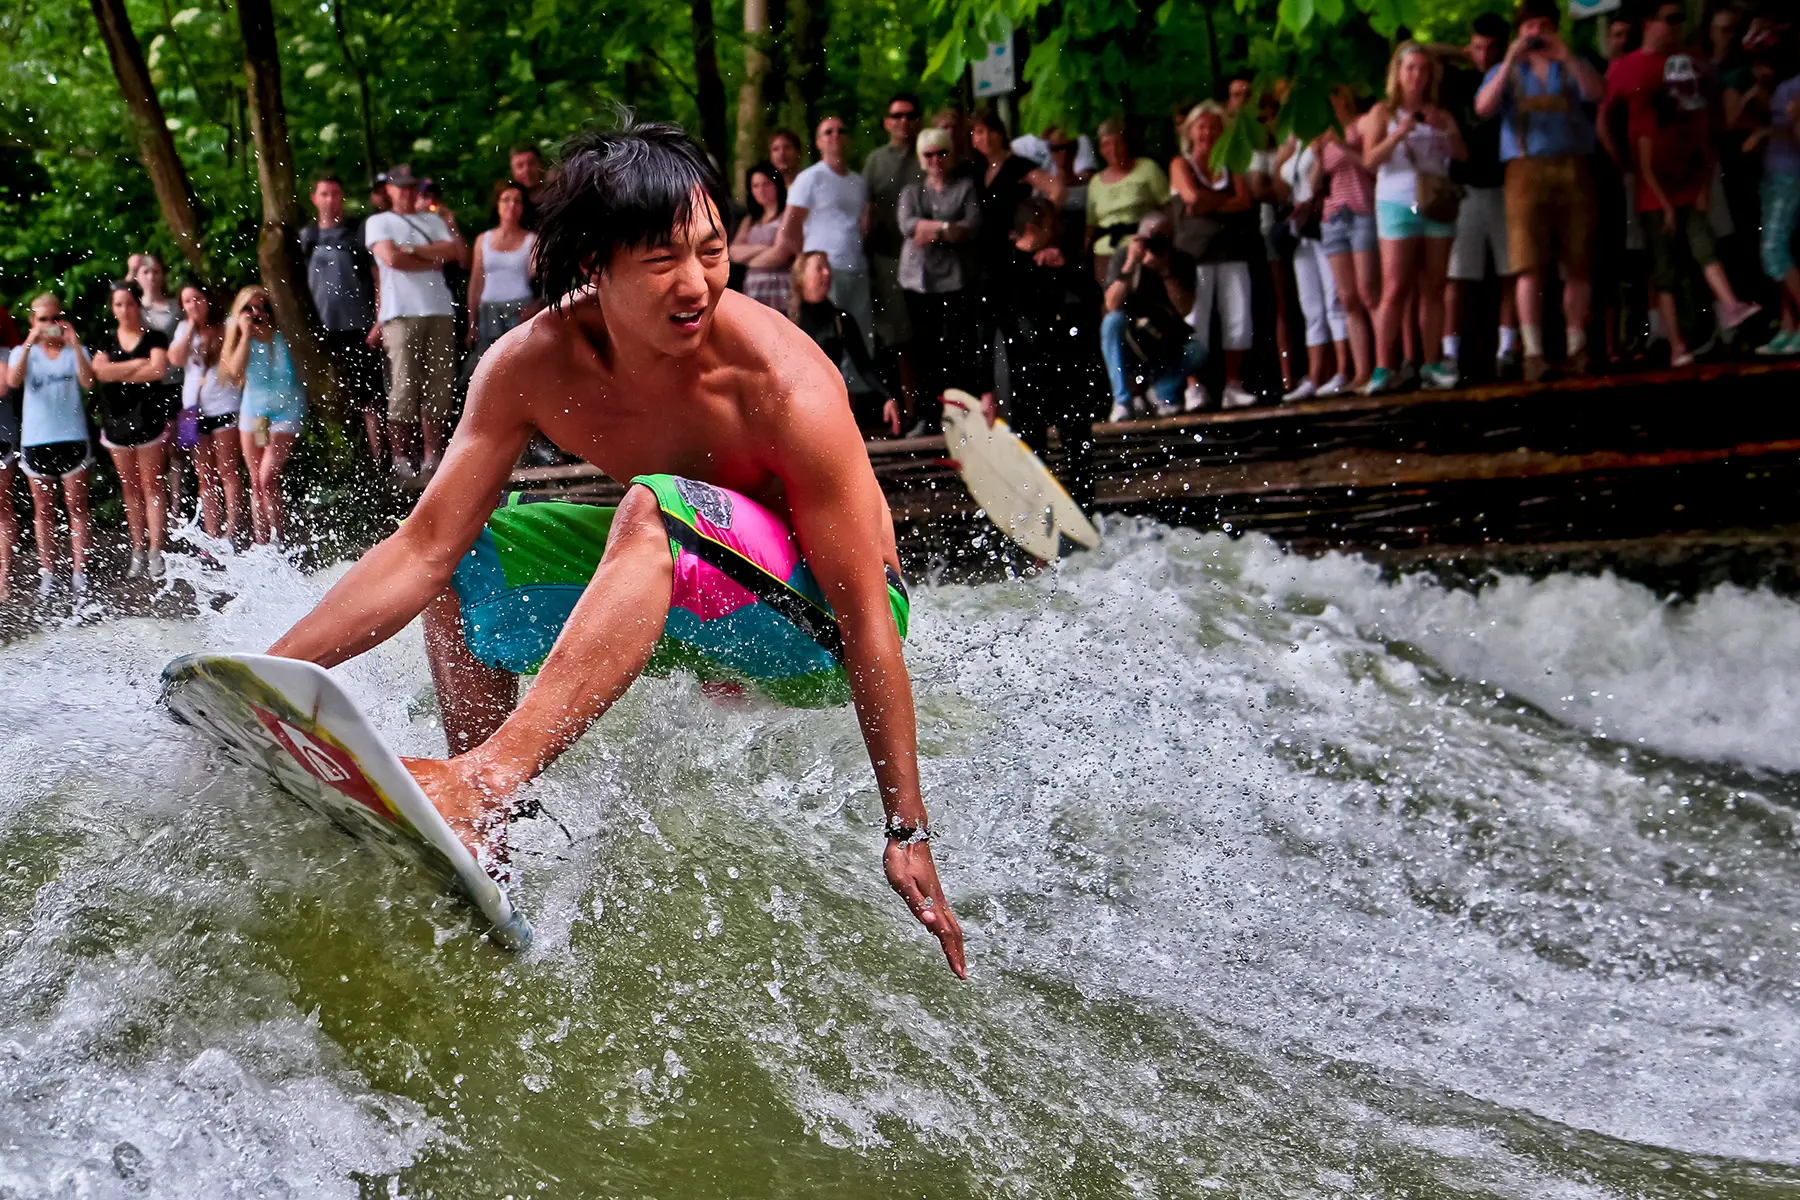 Surfing on the Eisbach in Munich, Germany